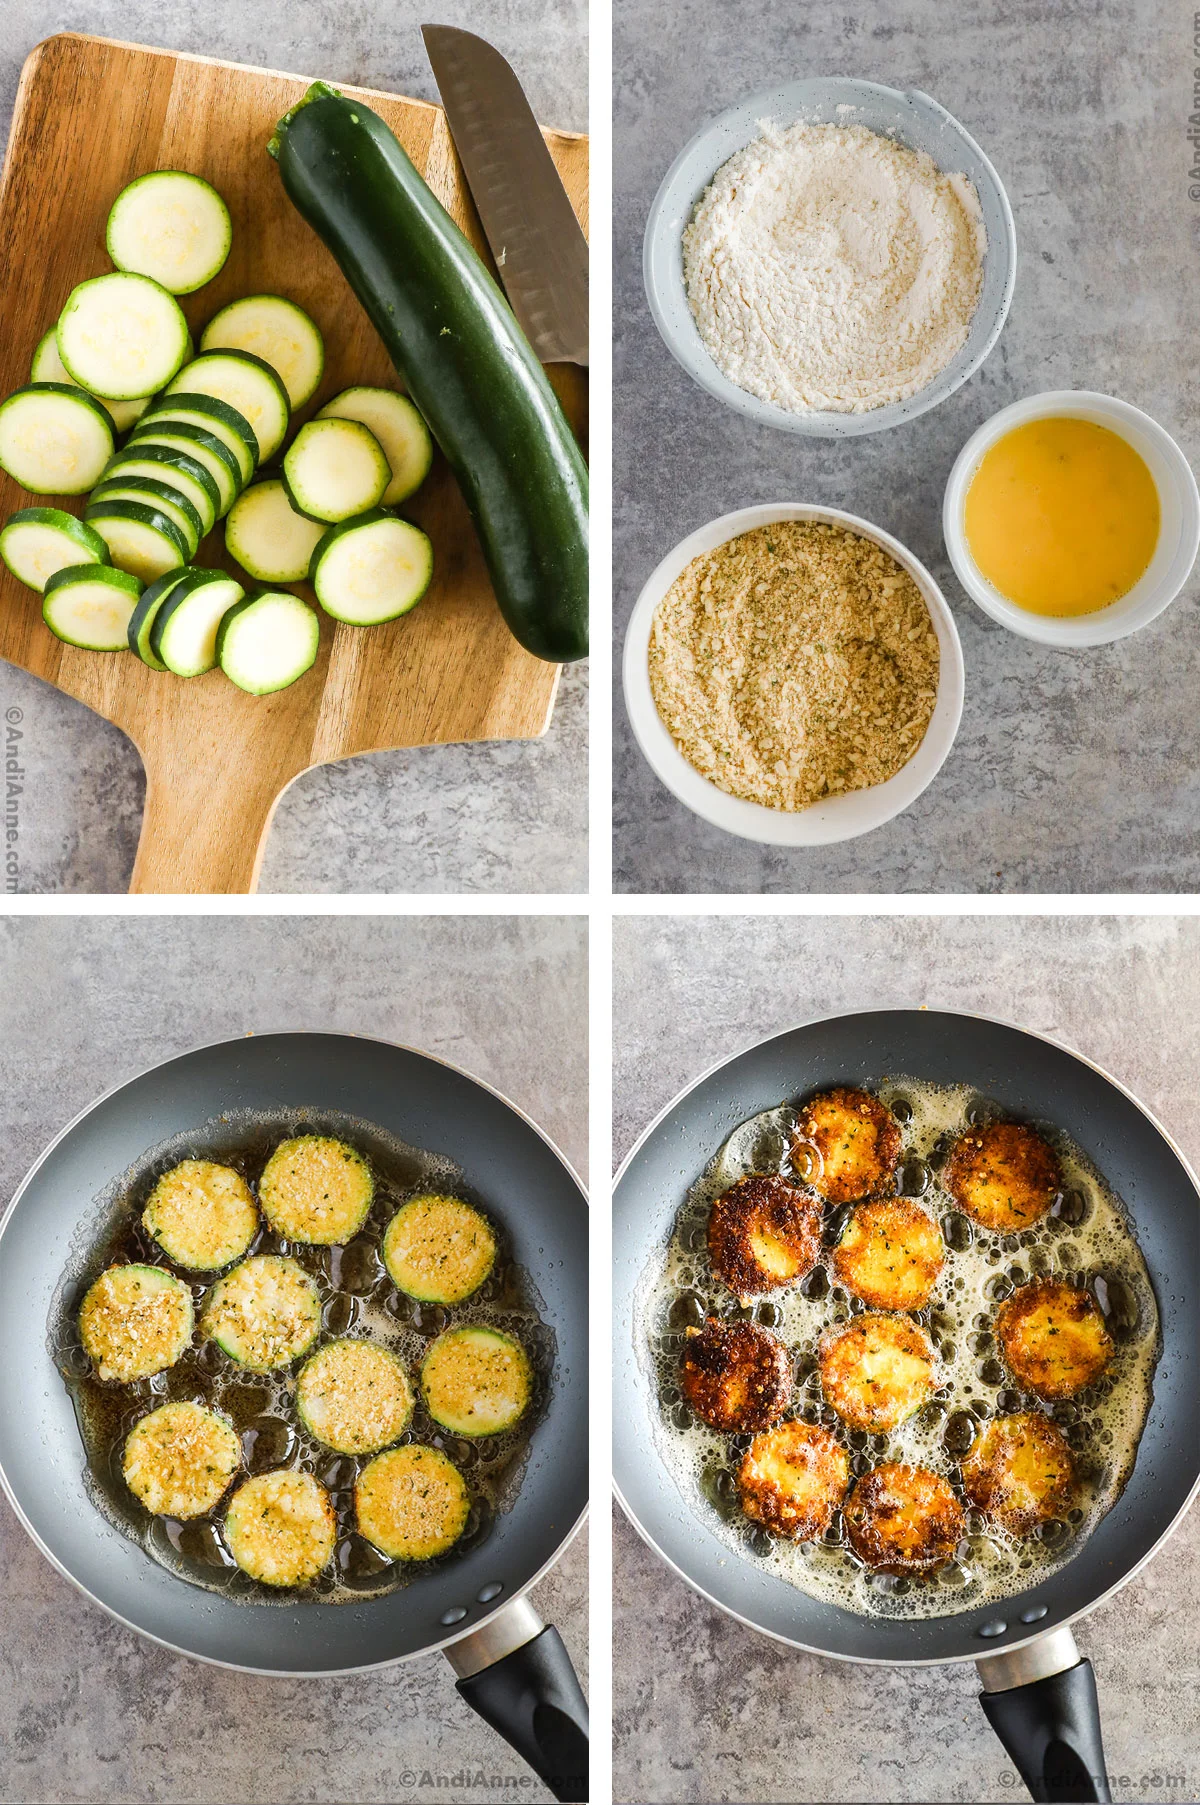 Four images showing steps to make recipe. First is sliced fresh zucchini, second is three bowls  of various ingredients, third is is uncooked zuchcini in frying pan with butter, last is cooked zucchini in frying pan with butter.